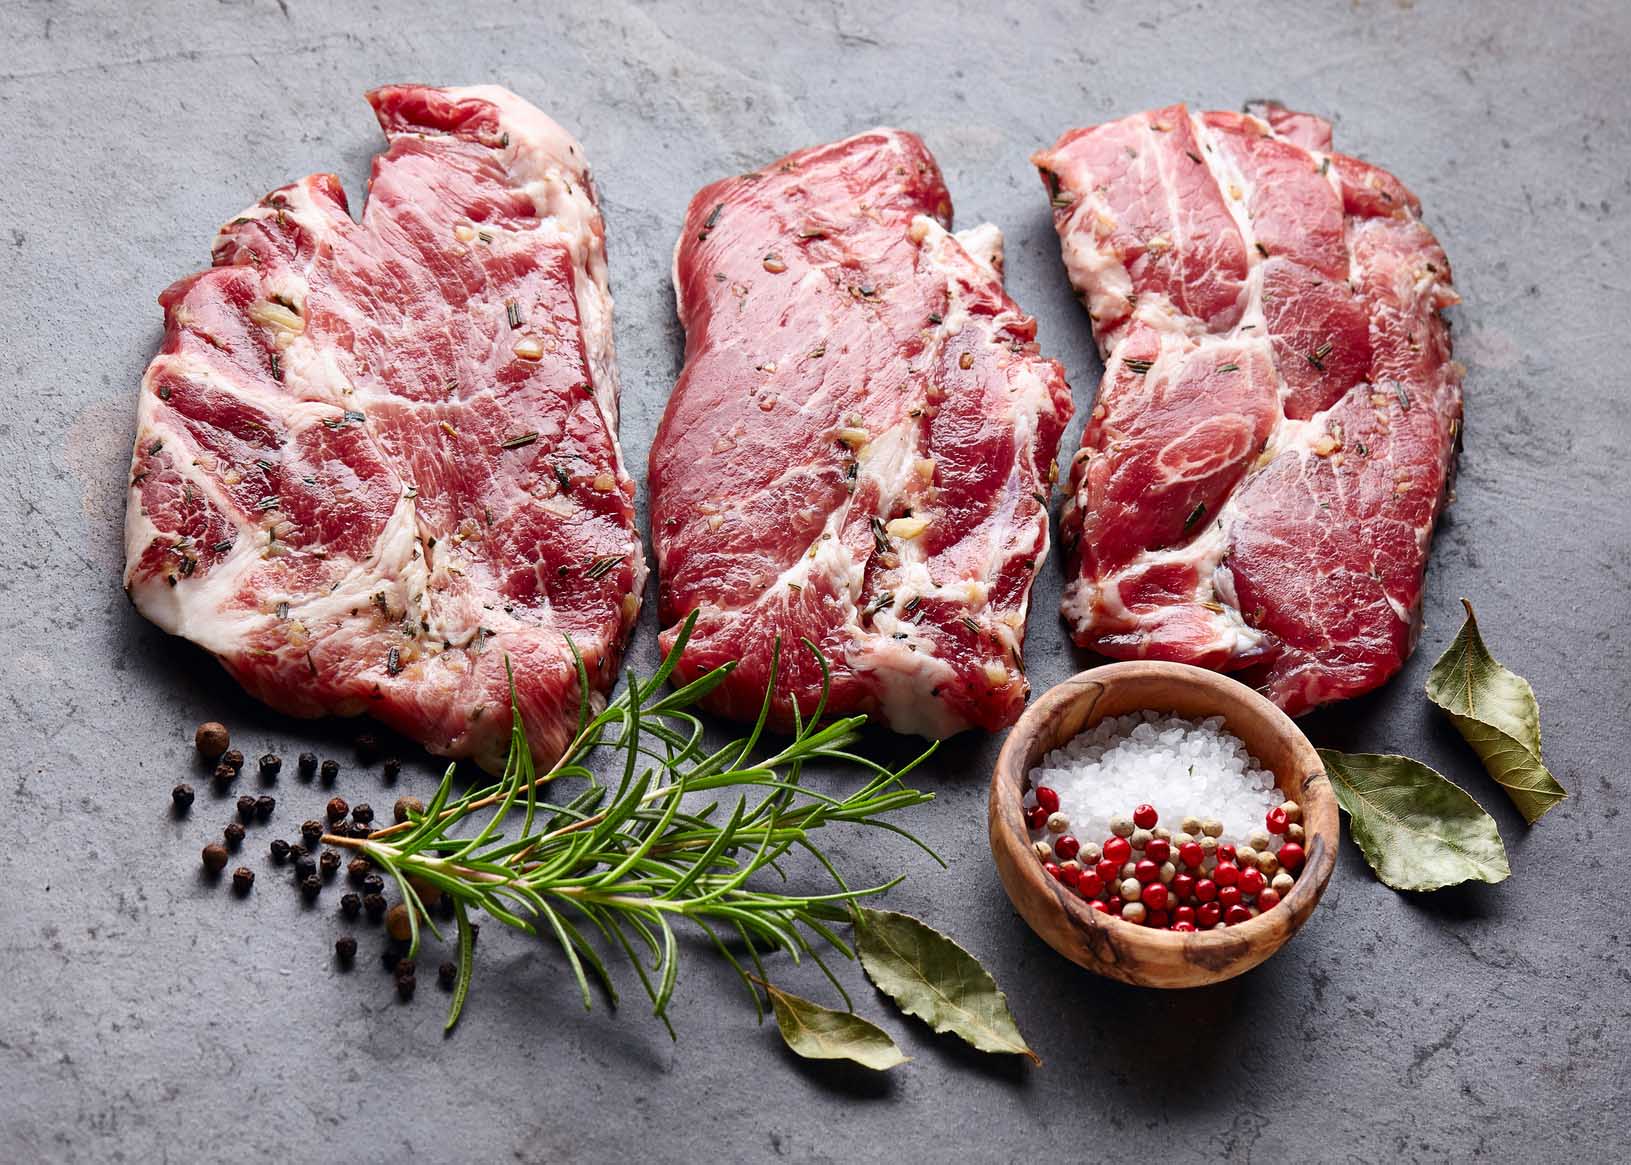 Three pork steaks on stone tabletop ready to cook, seasoned with fresh salt, peppercorn and rosemary. Gourmet Spice Company, Wholesale Food Distributor.